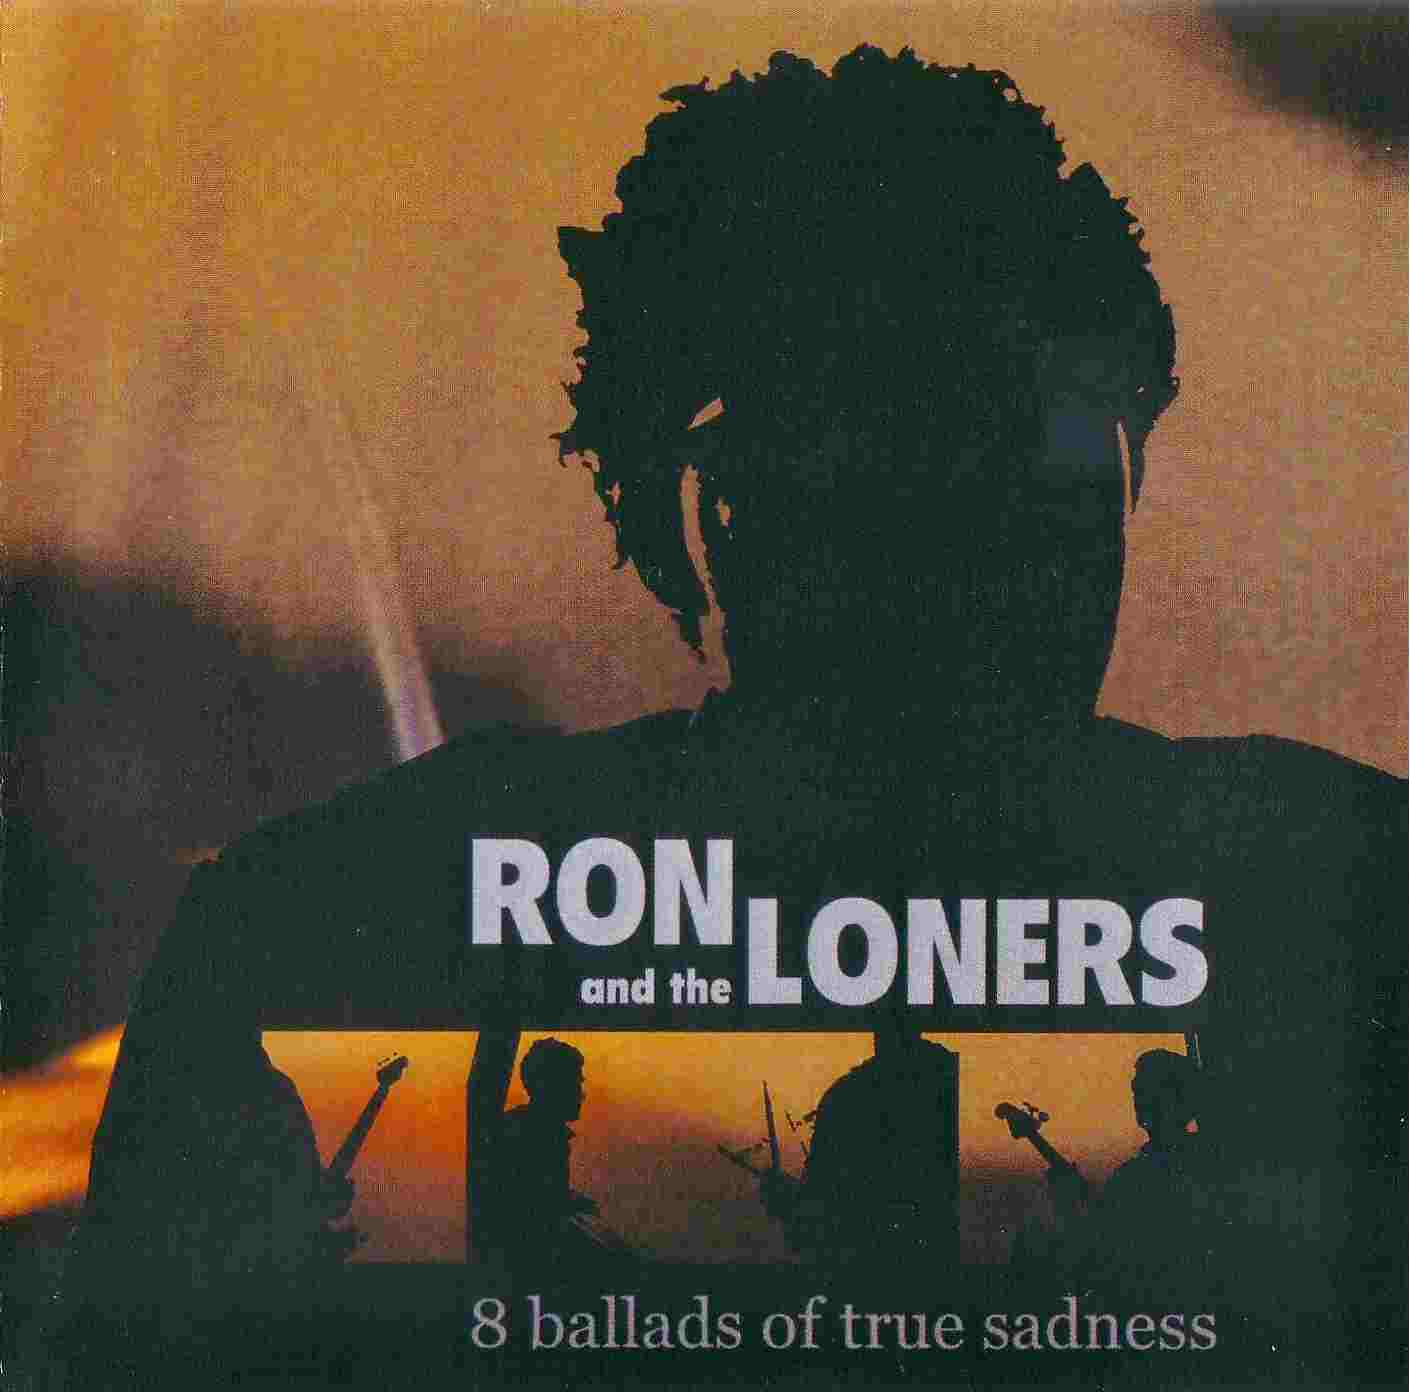 ron and the loners - 8 ballads of true sadness